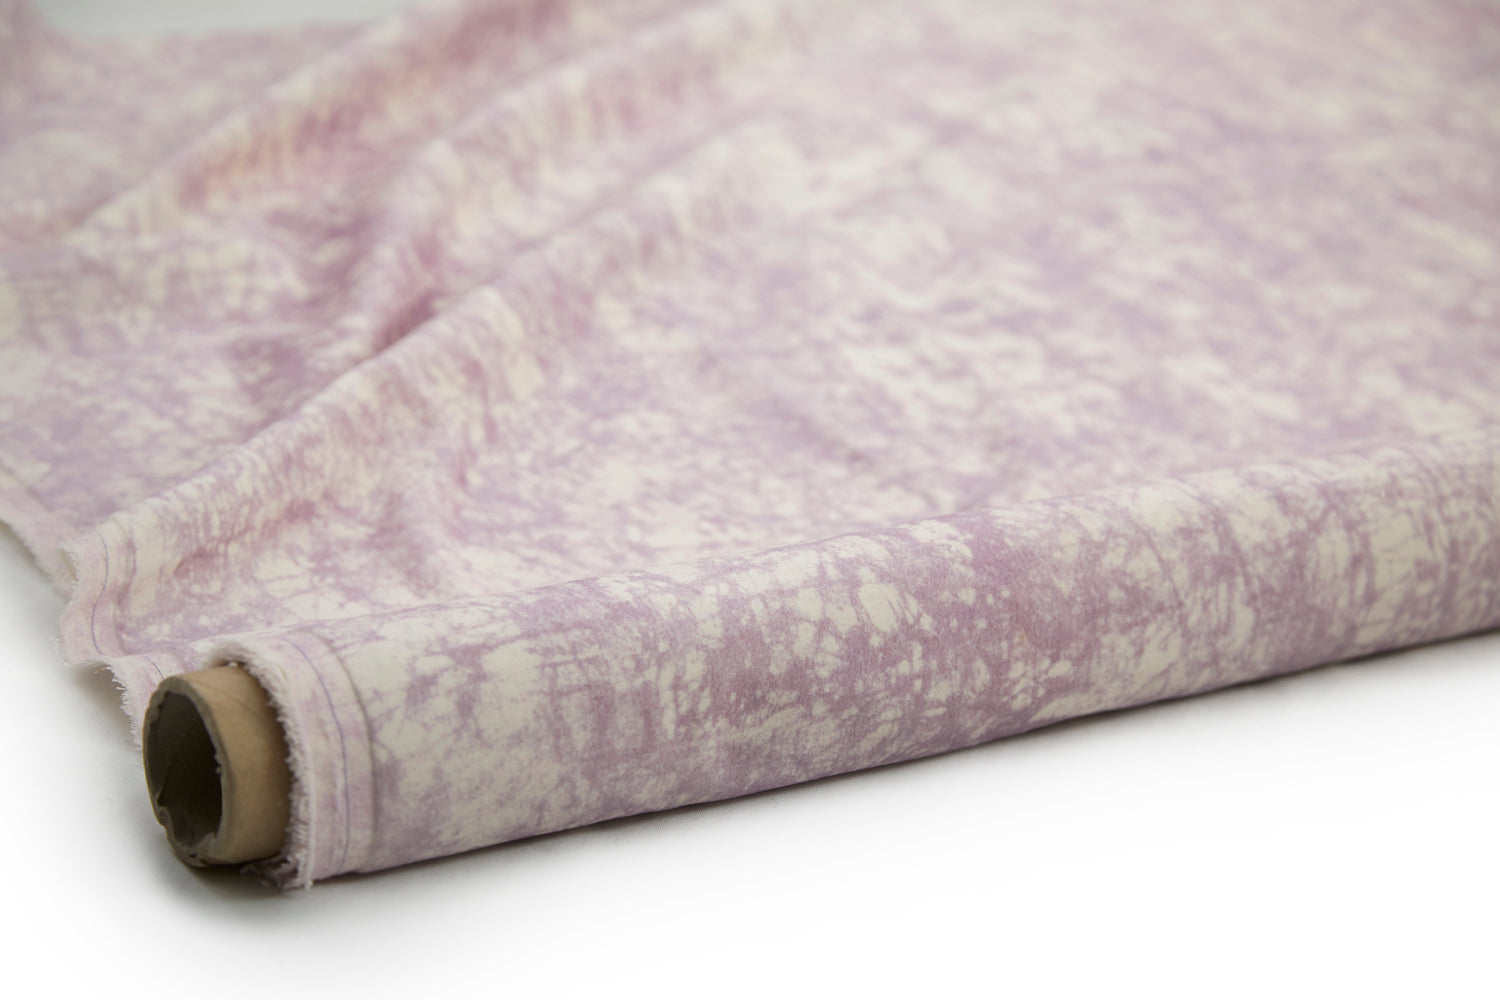 Partially unrolled fabric in an organic crumpled texture in light purple on a cream field.